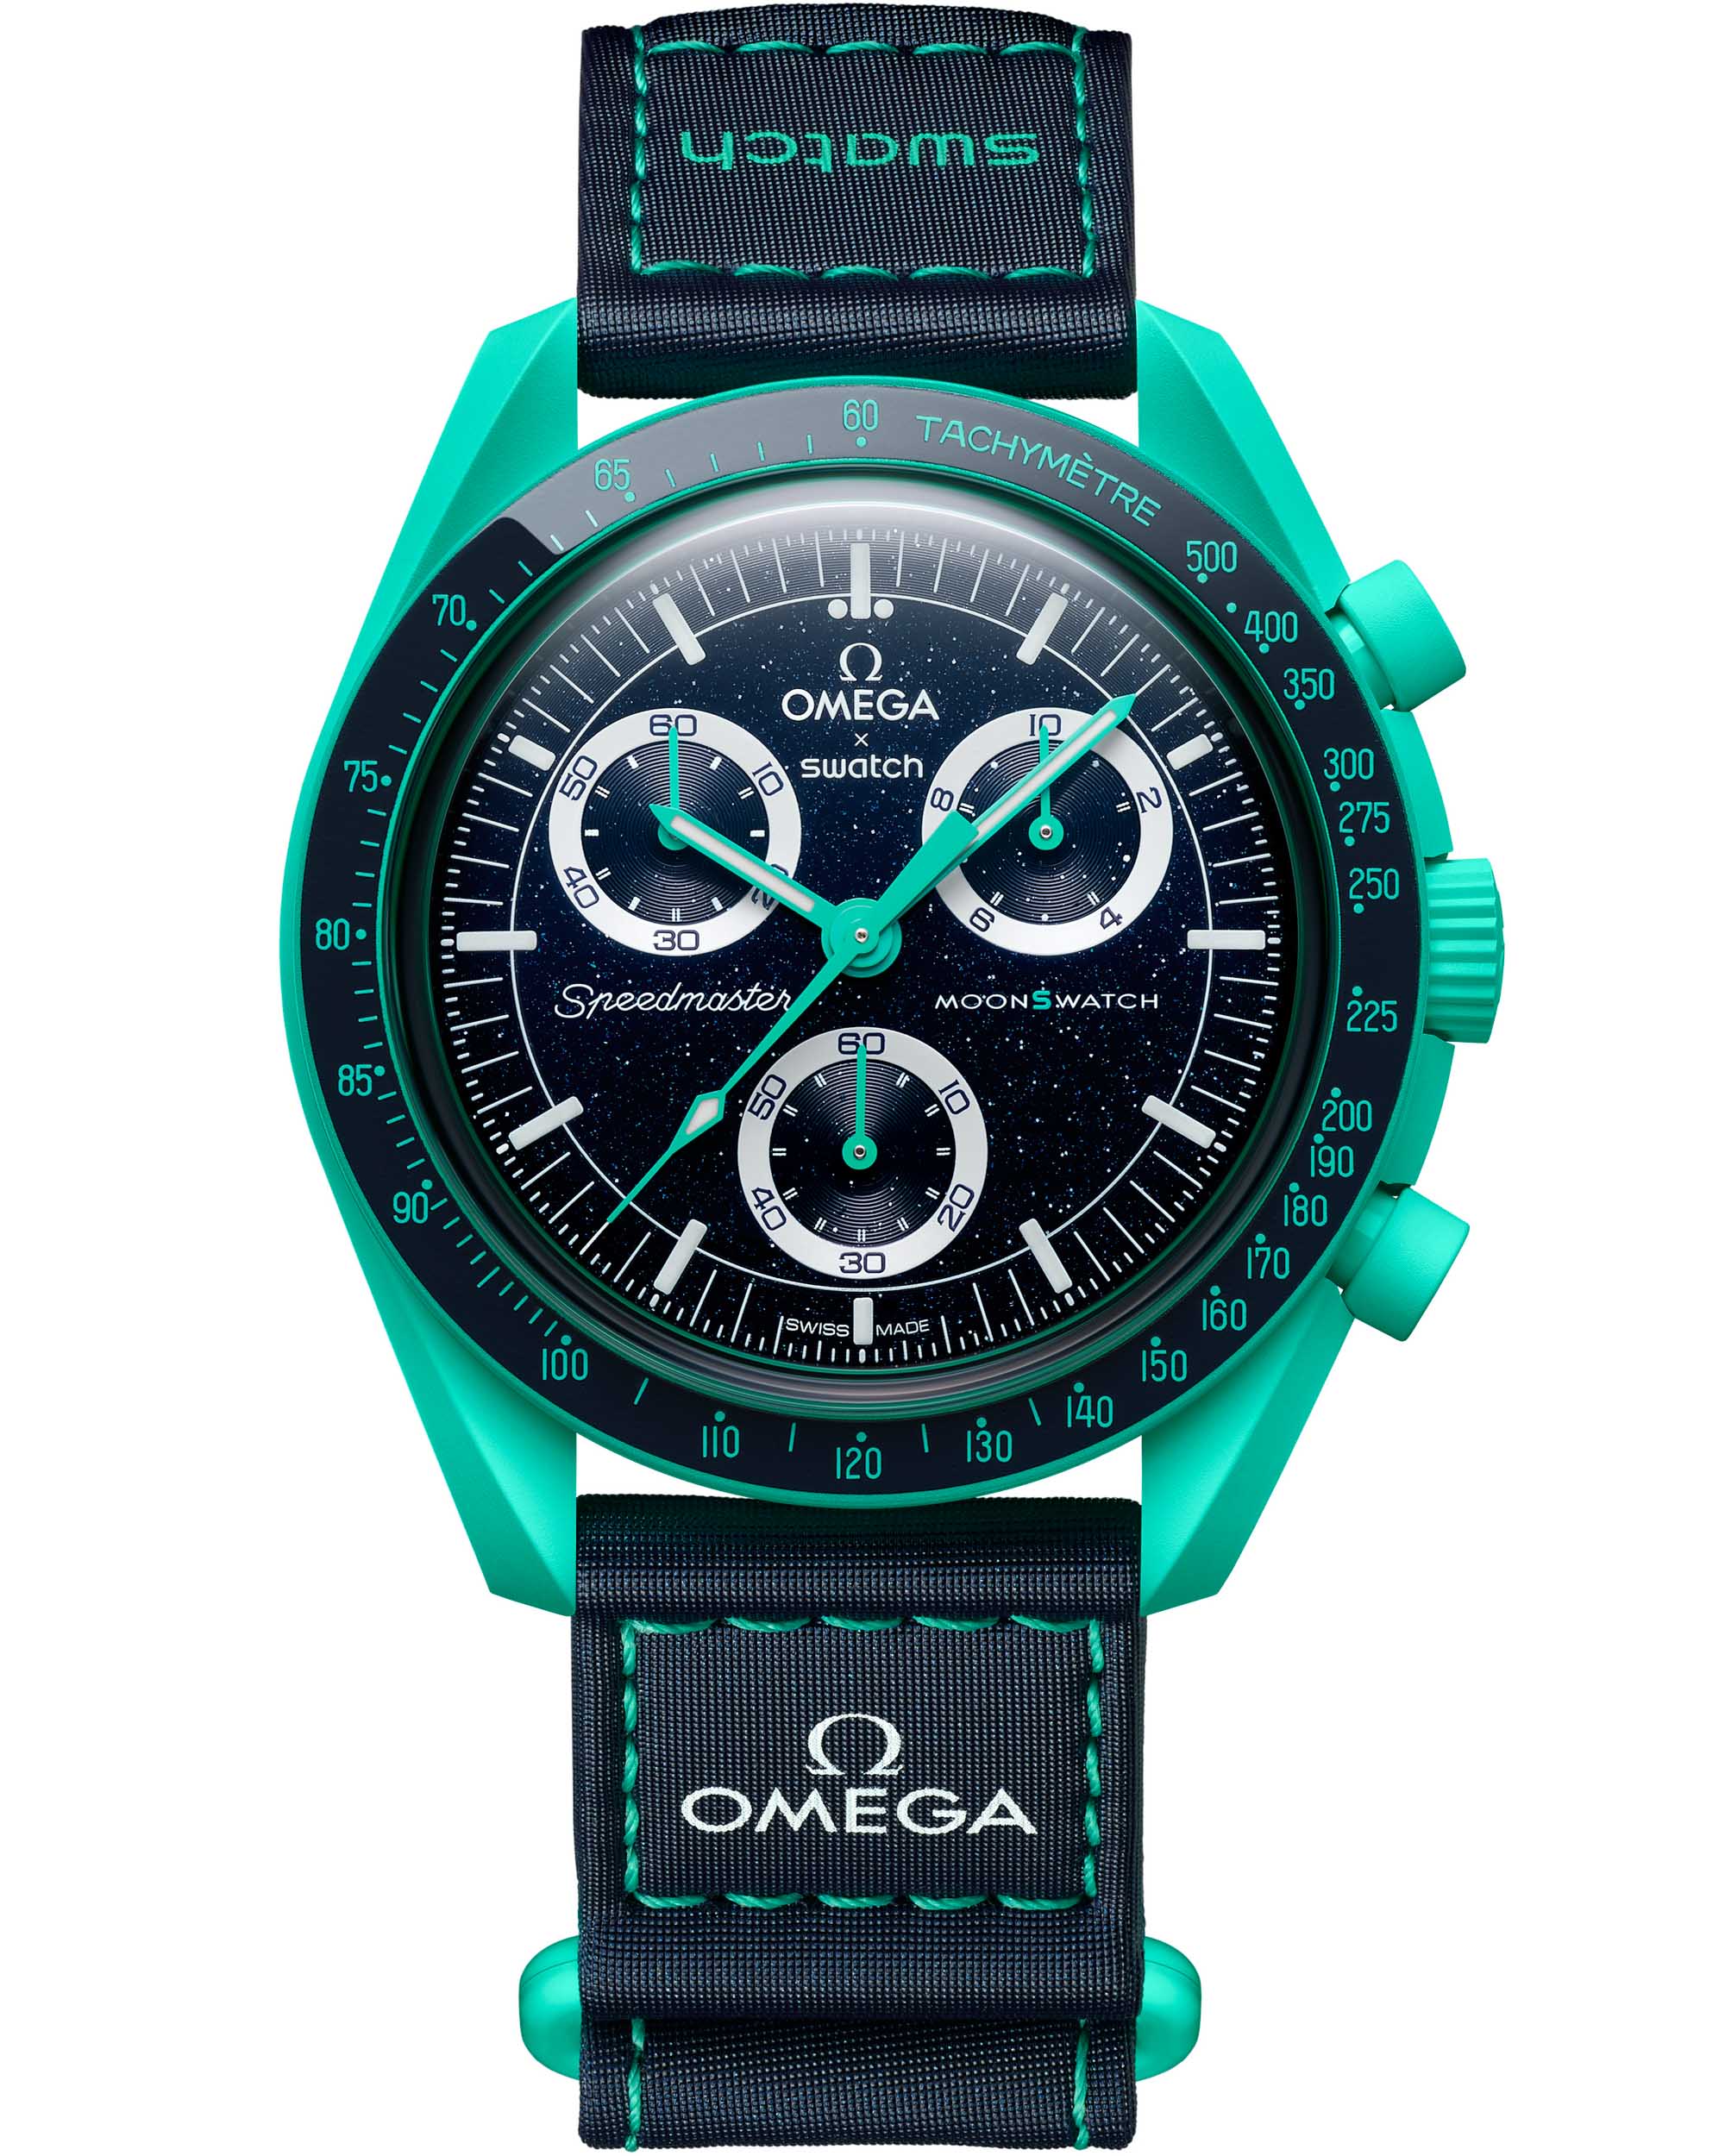 The Omega X Swatch Mission on Earth 'Polar Lights' is a striking timepiece that draws inspiration from the vibrant hues of the aurora borealis, available at Cop Underdog In-store and ready to ship.